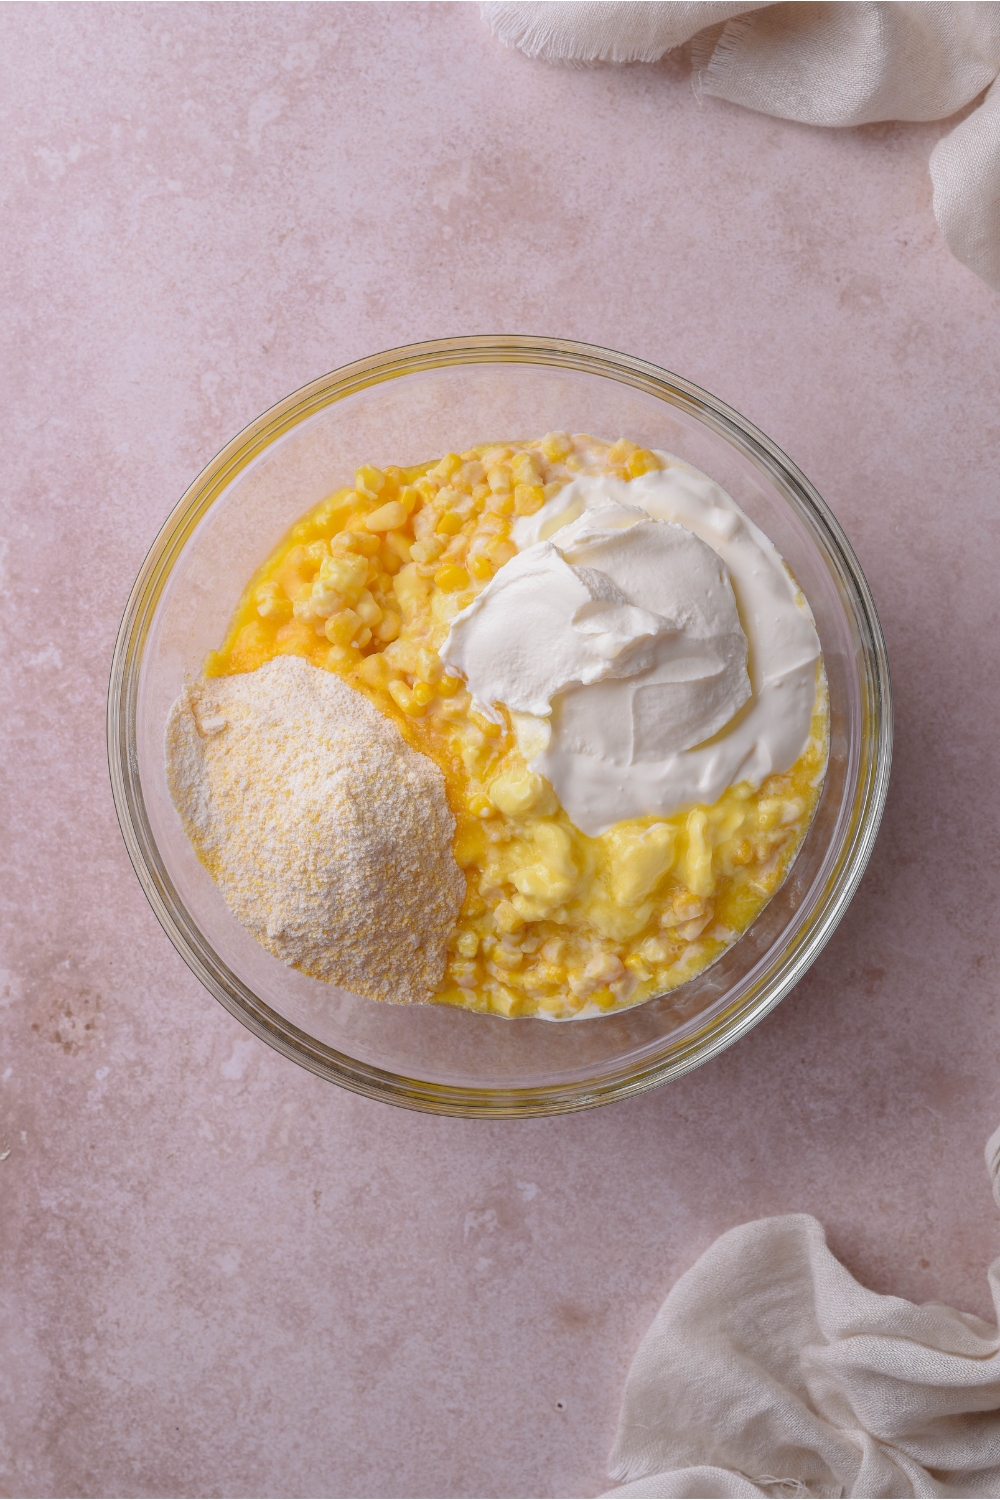 A clear bowl filled with creamed corn, sour cream, and dry muffin mix.